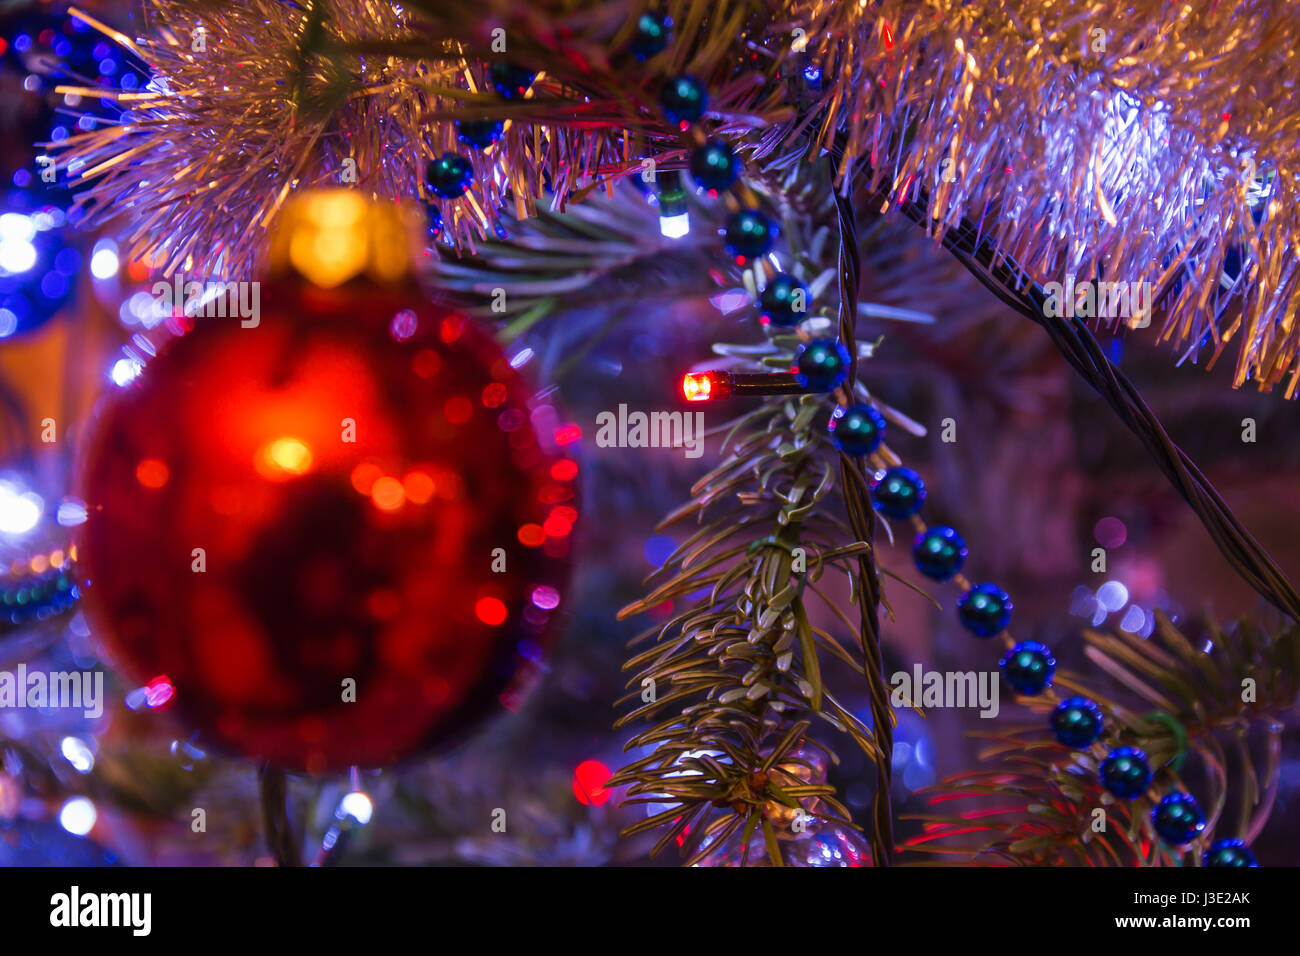 Red bauble on a christmas tree Stock Photo